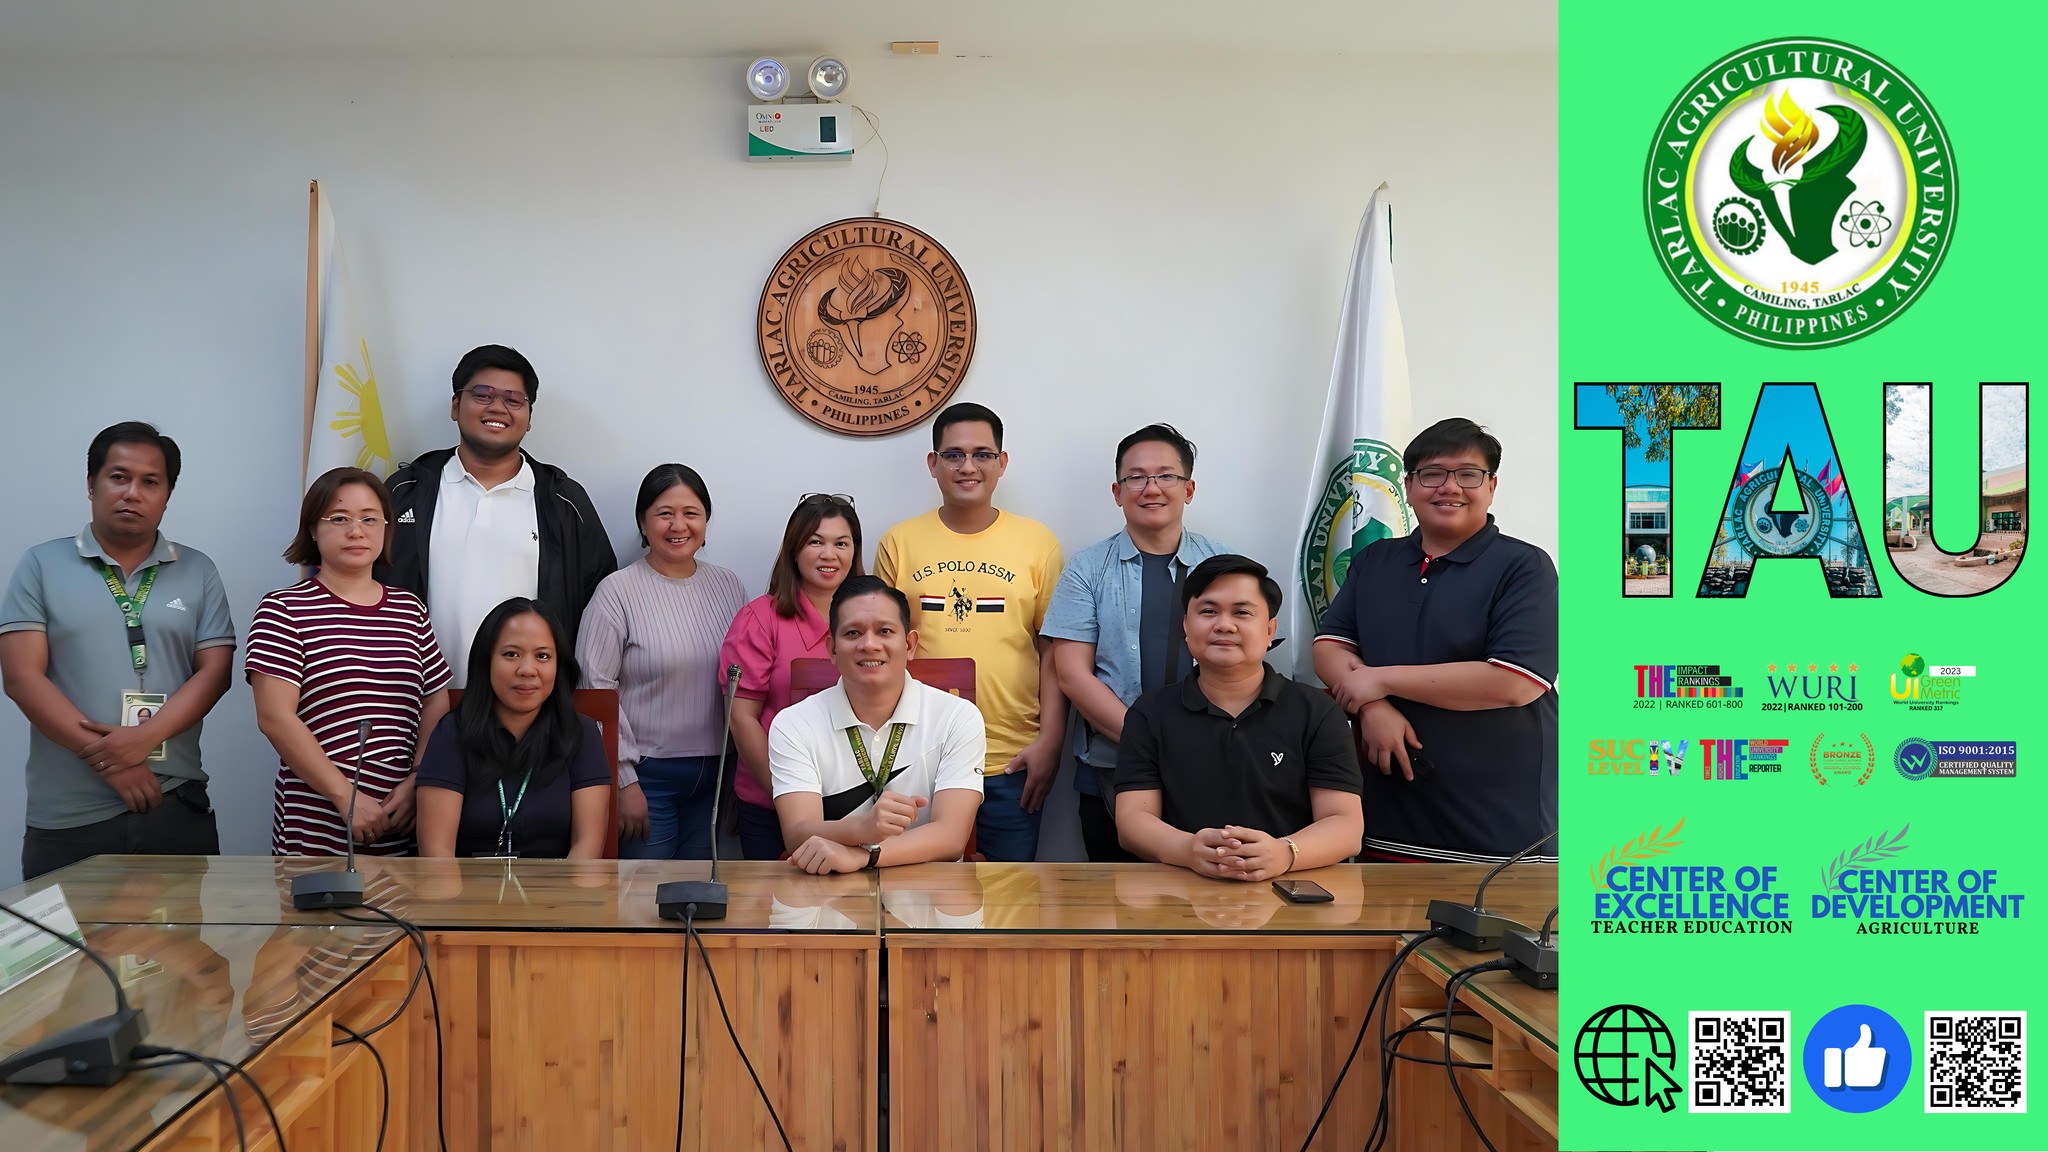 𝐂𝐀𝐏𝐓𝐔𝐑𝐄𝐃 𝐈𝐍 𝐋𝐄𝐍𝐒 | Members of the technical working group from Don Honorio Ventura Technological State University (DHVTSU) confer with their counterparts from the Tarlac Agricultural University’s (TAU) World University Rankings for Innovation (WURI) committee at the Office of the President (OP) Conference Room on 9 July.